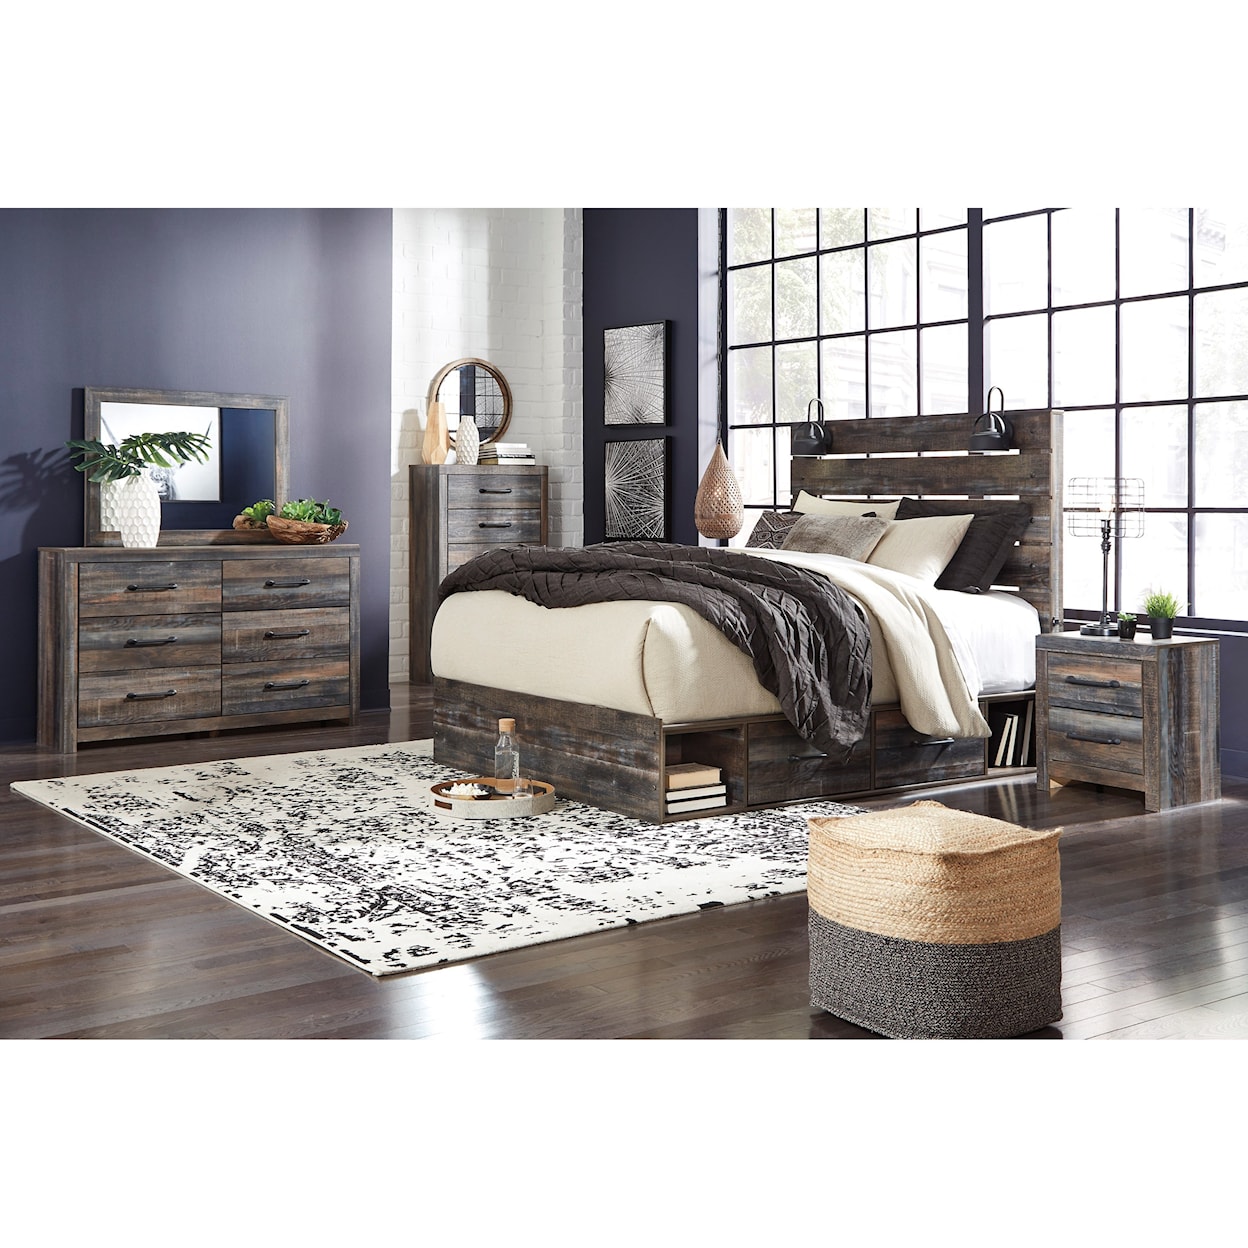 Signature Design by Ashley Drystan Queen Storage Bed with 2 Drawers